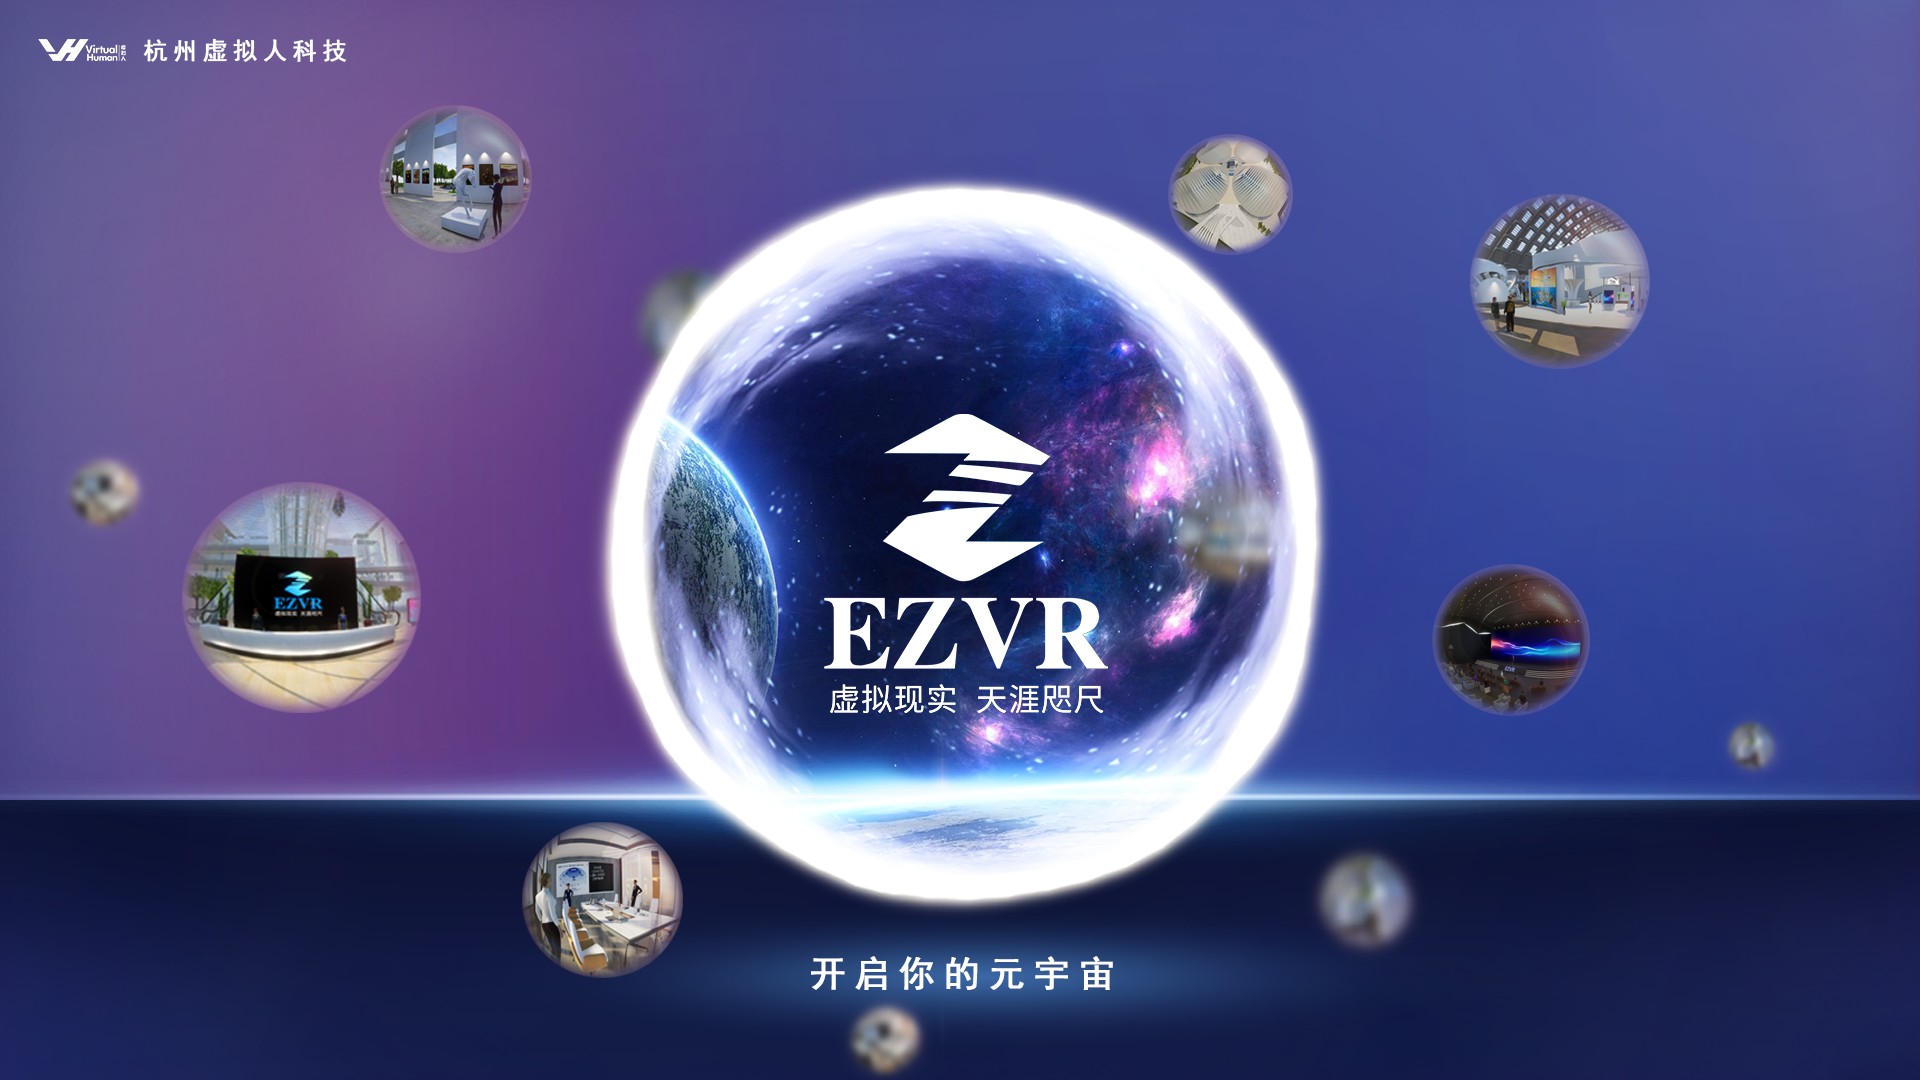 EZVR主宣传图.png